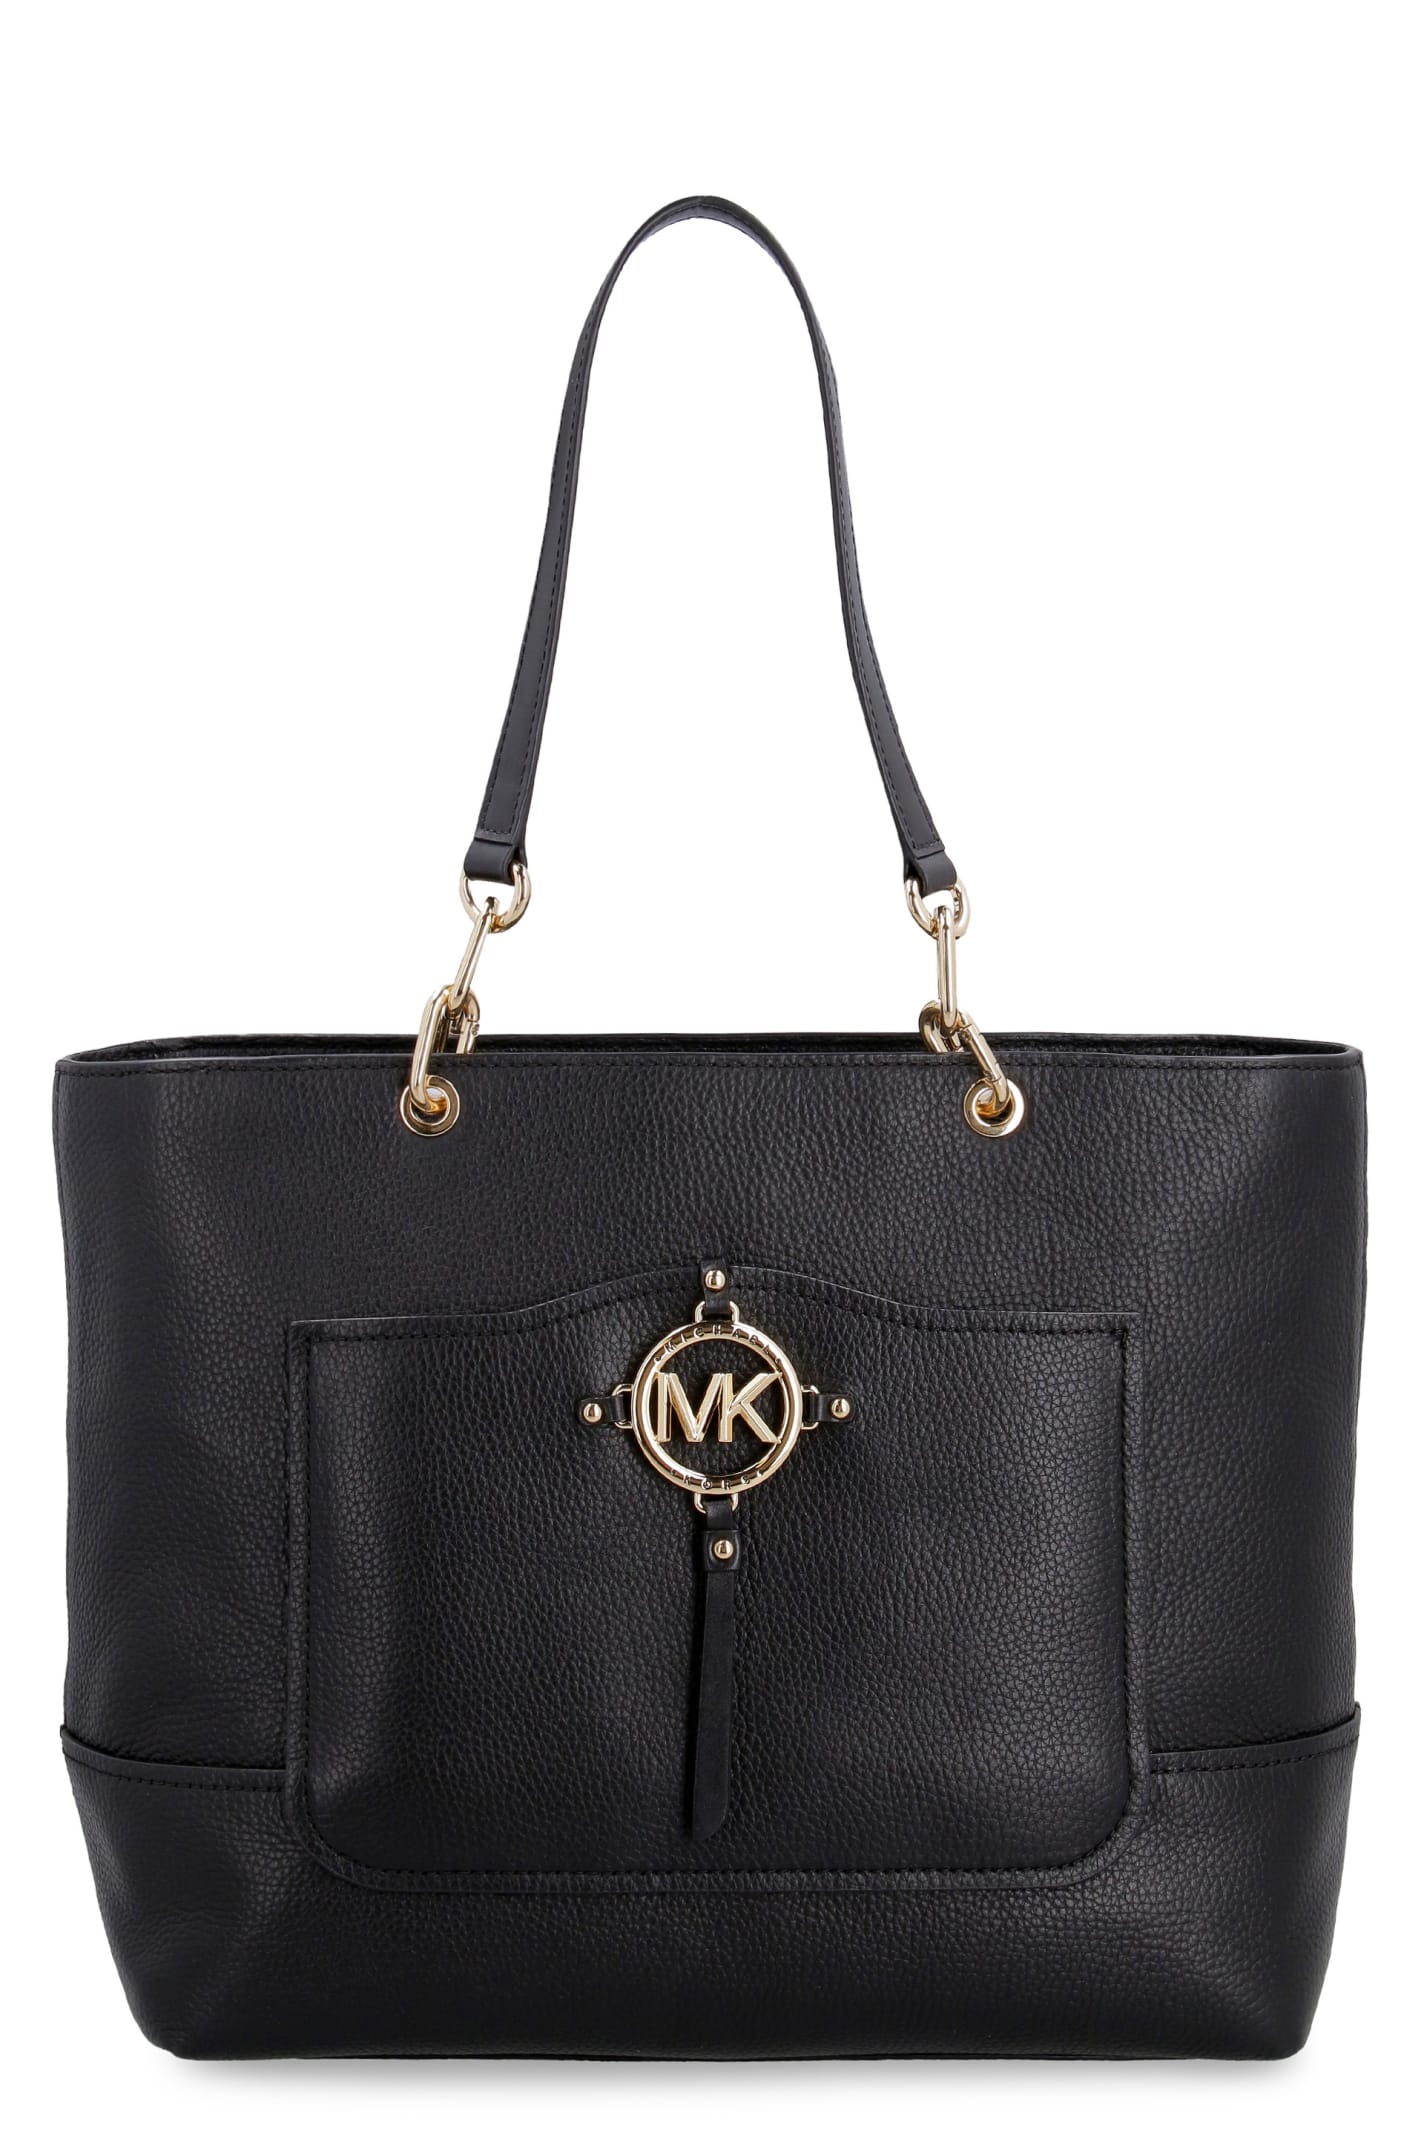 MICHAEL Michael Kors Amy Pebbled Leather Tote